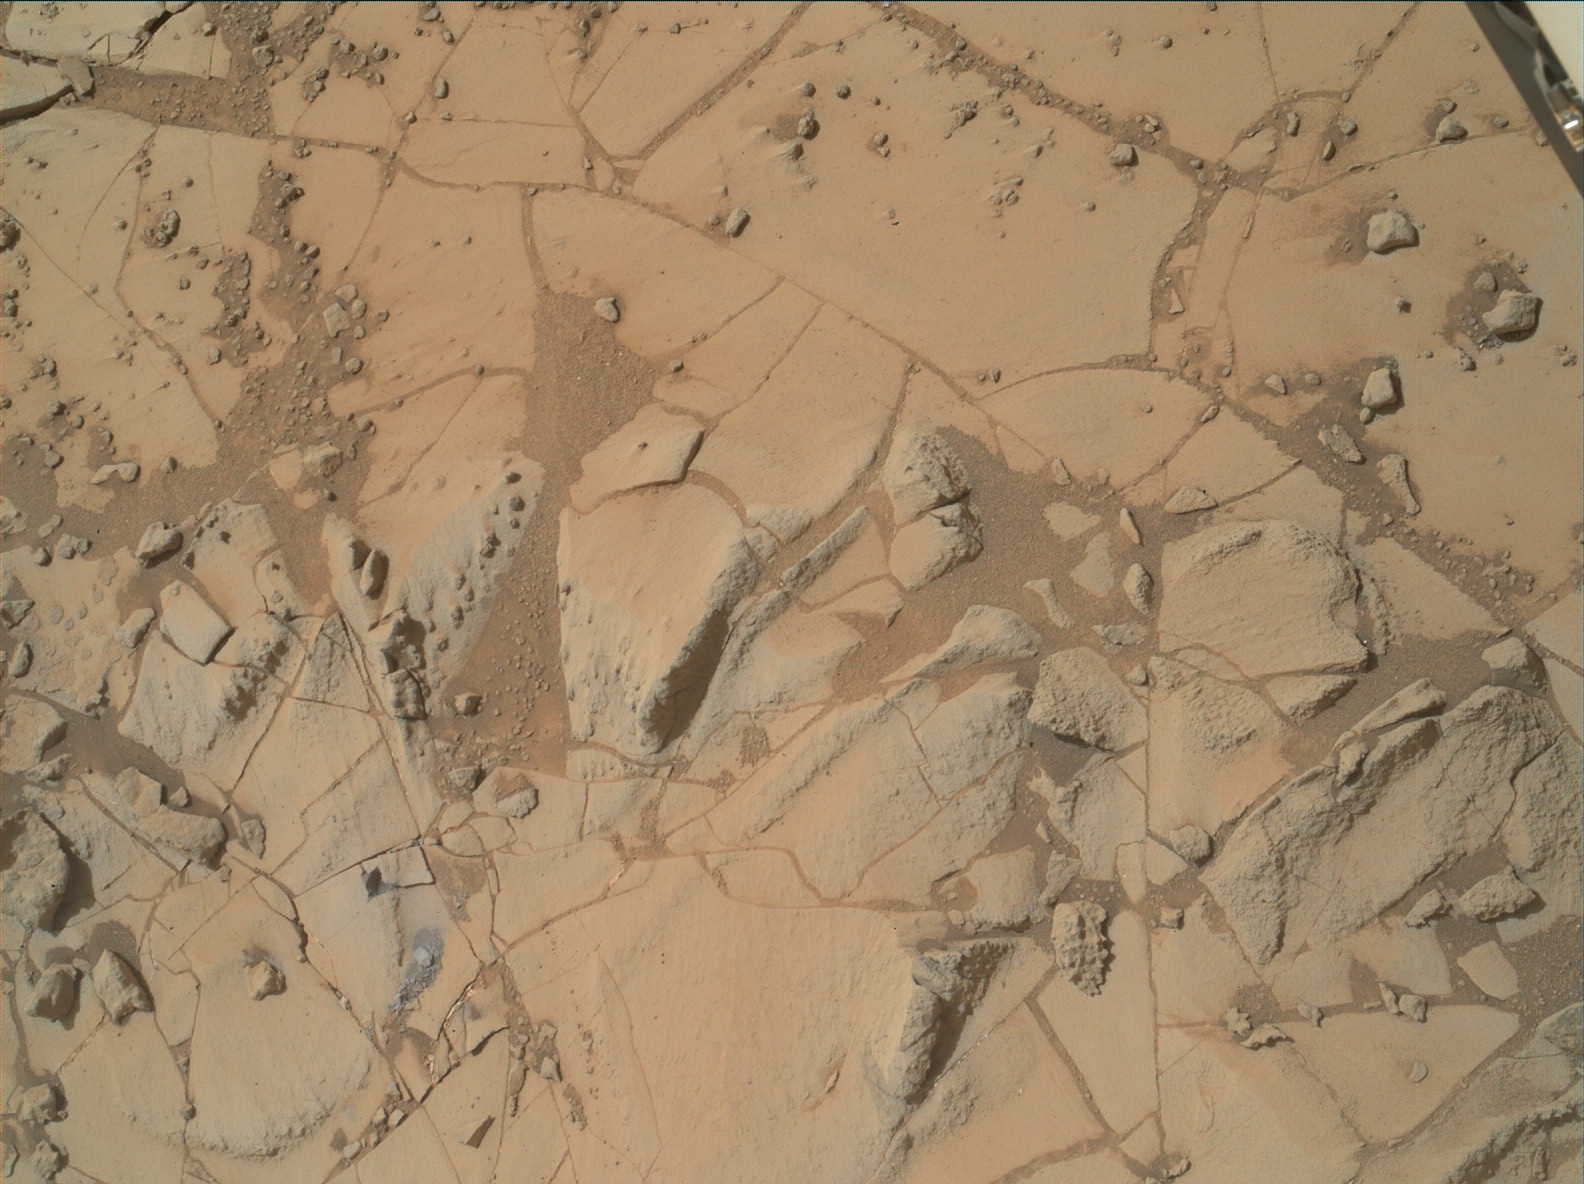 Nasa's Mars rover Curiosity acquired this image using its Mars Hand Lens Imager (MAHLI) on Sol 868